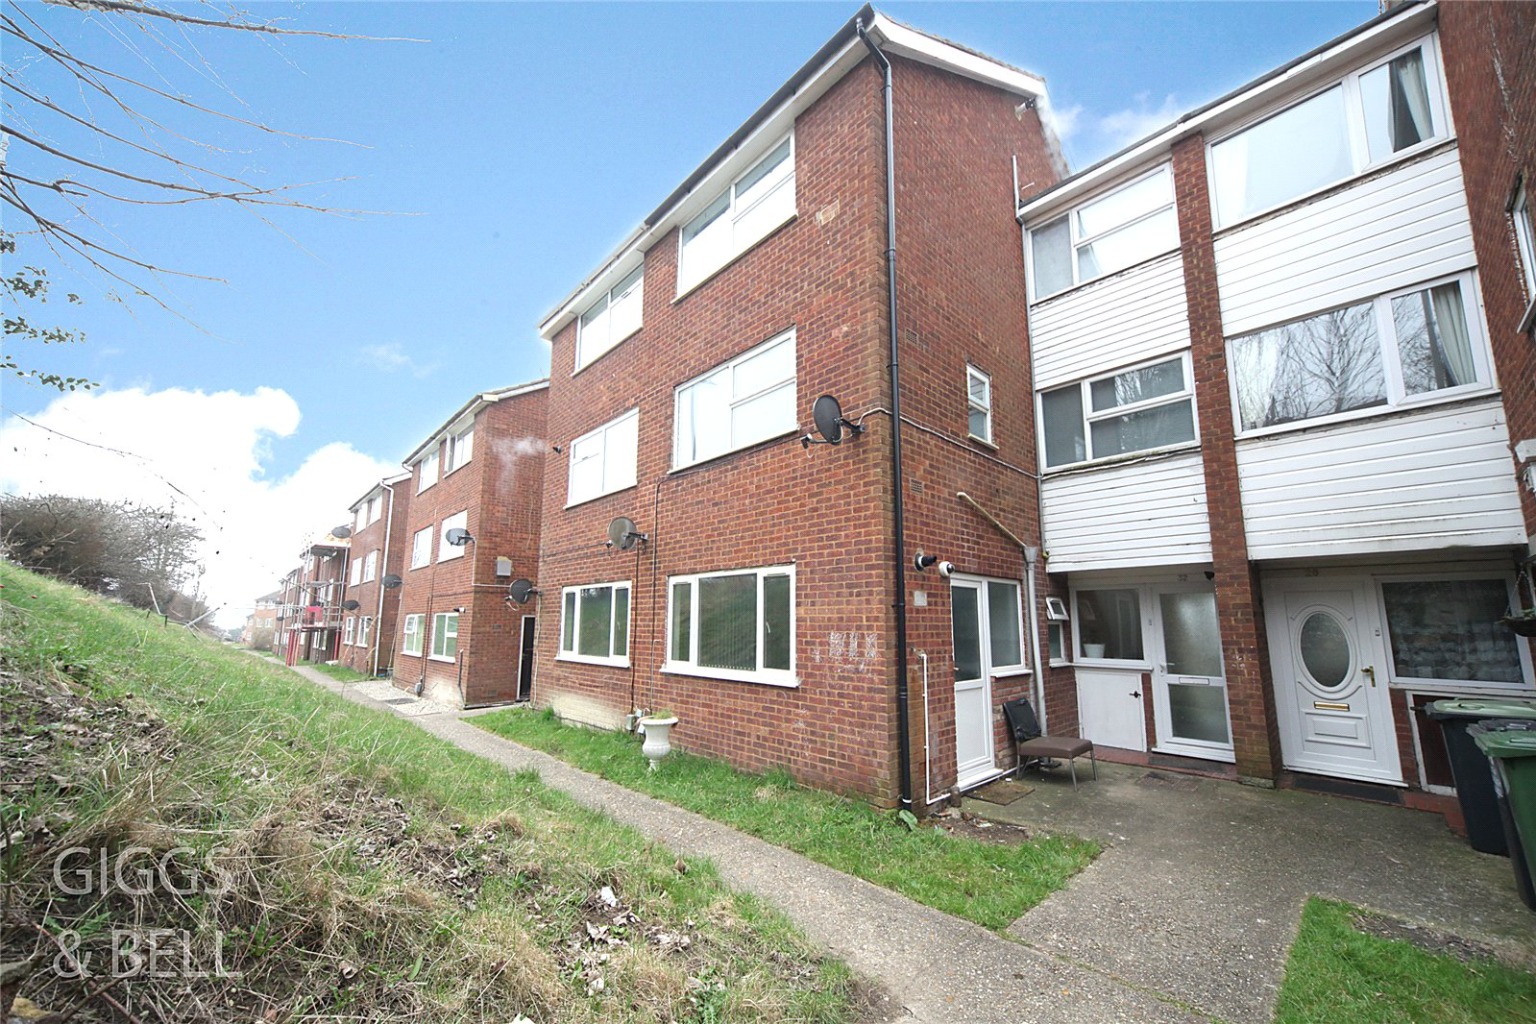 This split-level maisonette is situated In the highly popular location Vauxhall Park which is well sought after due to its excellent access to travel hubs including London Luton airport, Junction 10 of the motorway as well as Park Way train station all of these being within a 2 mile distance.